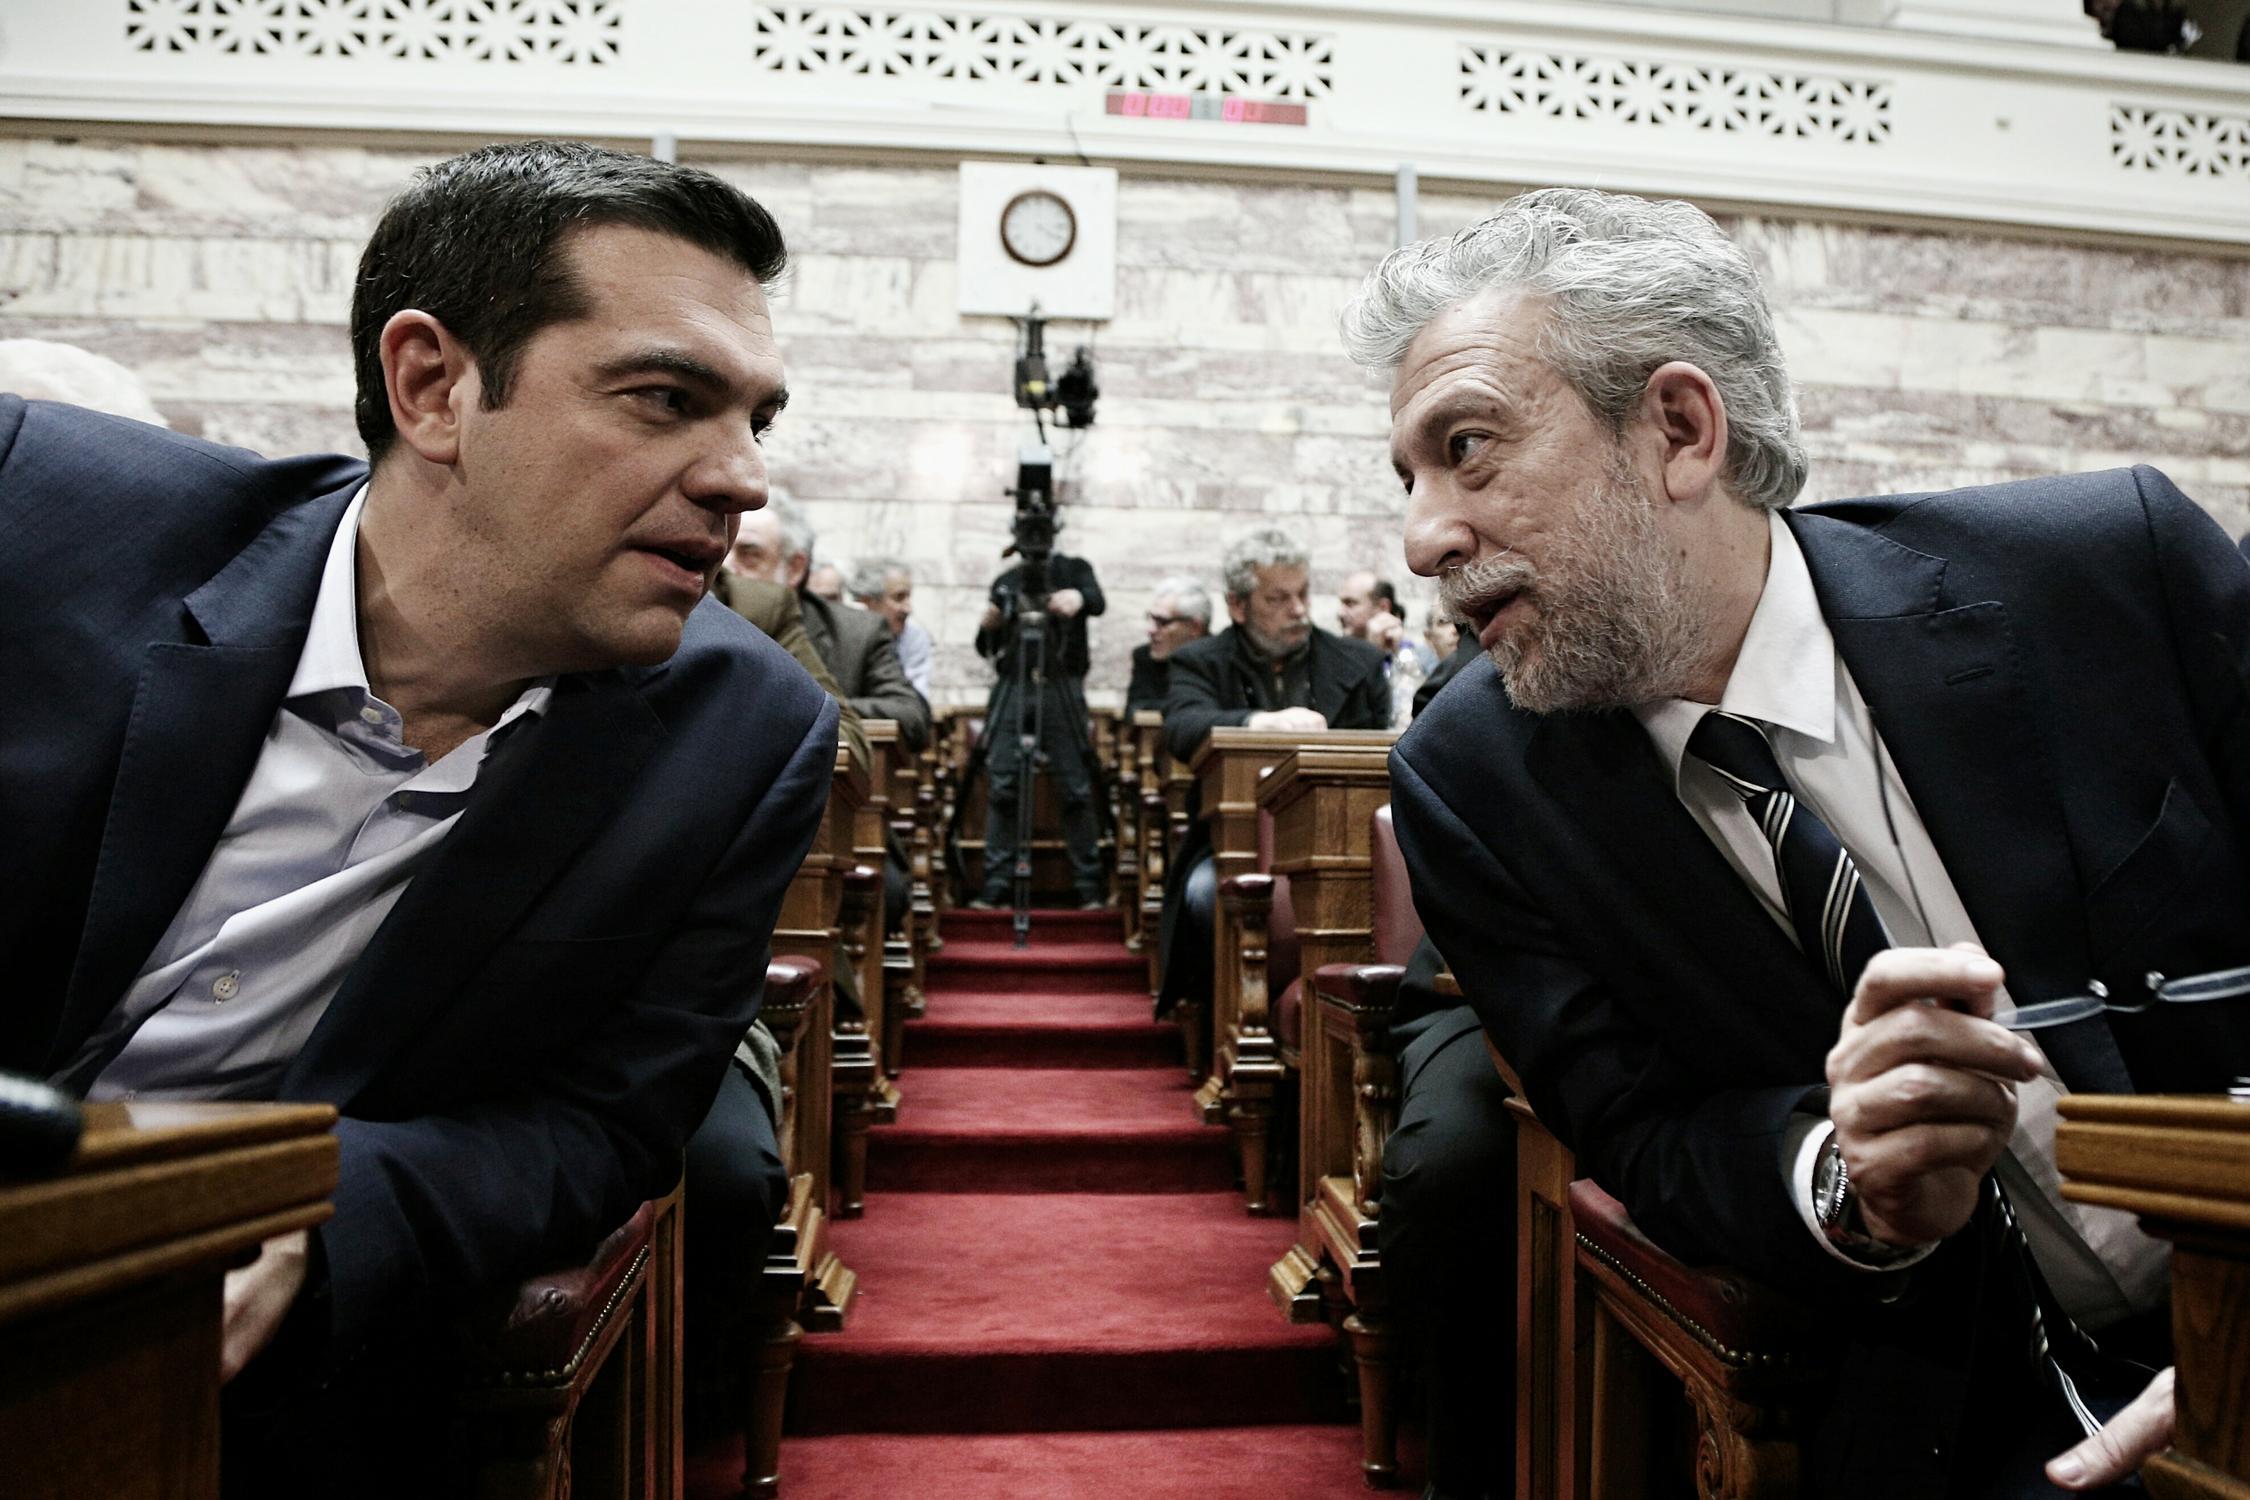 Greek Prime Minister Alexis Tsipras (L) talks with Deputy Minister of Sports Stavros Kontonis (R) at the parliament prior to deliver a speech to his parliamentary group in Athens, Greece on February 17, 2015.